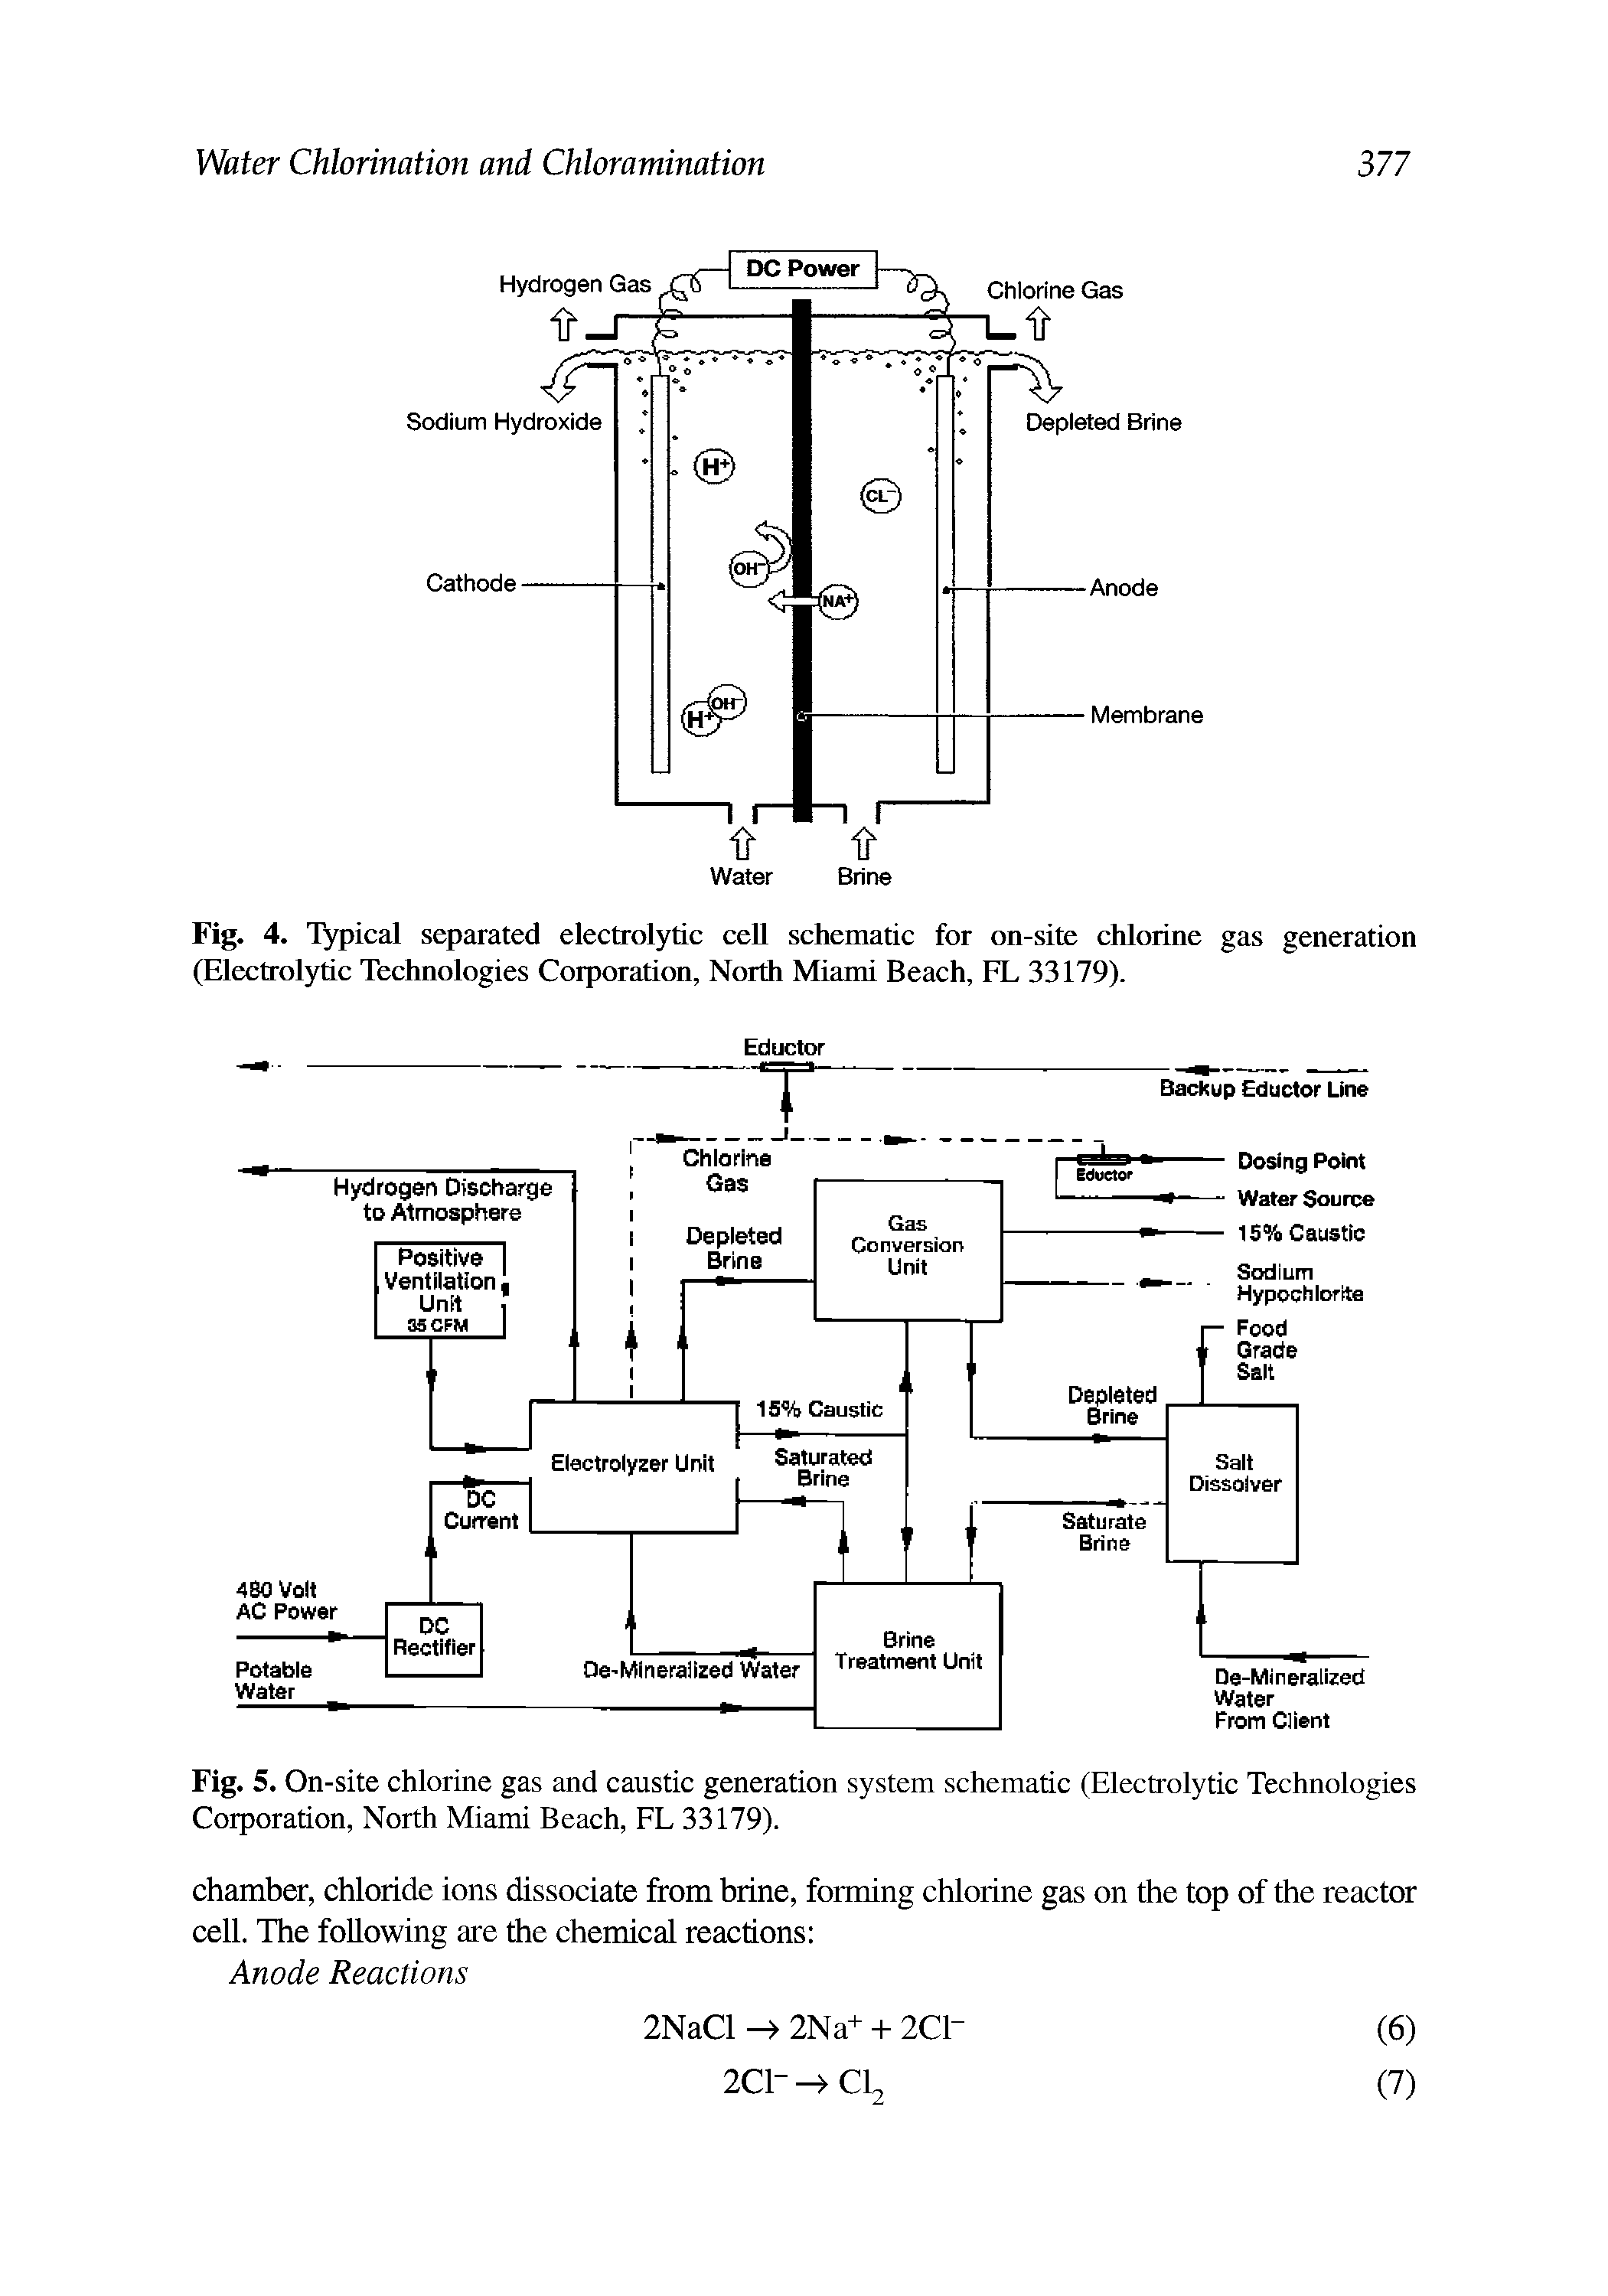 Fig. 5. On-site chlorine gas and caustic generation system schematic (Electrolytic Technologies Corporation, North Miami Beach, FL 33179).